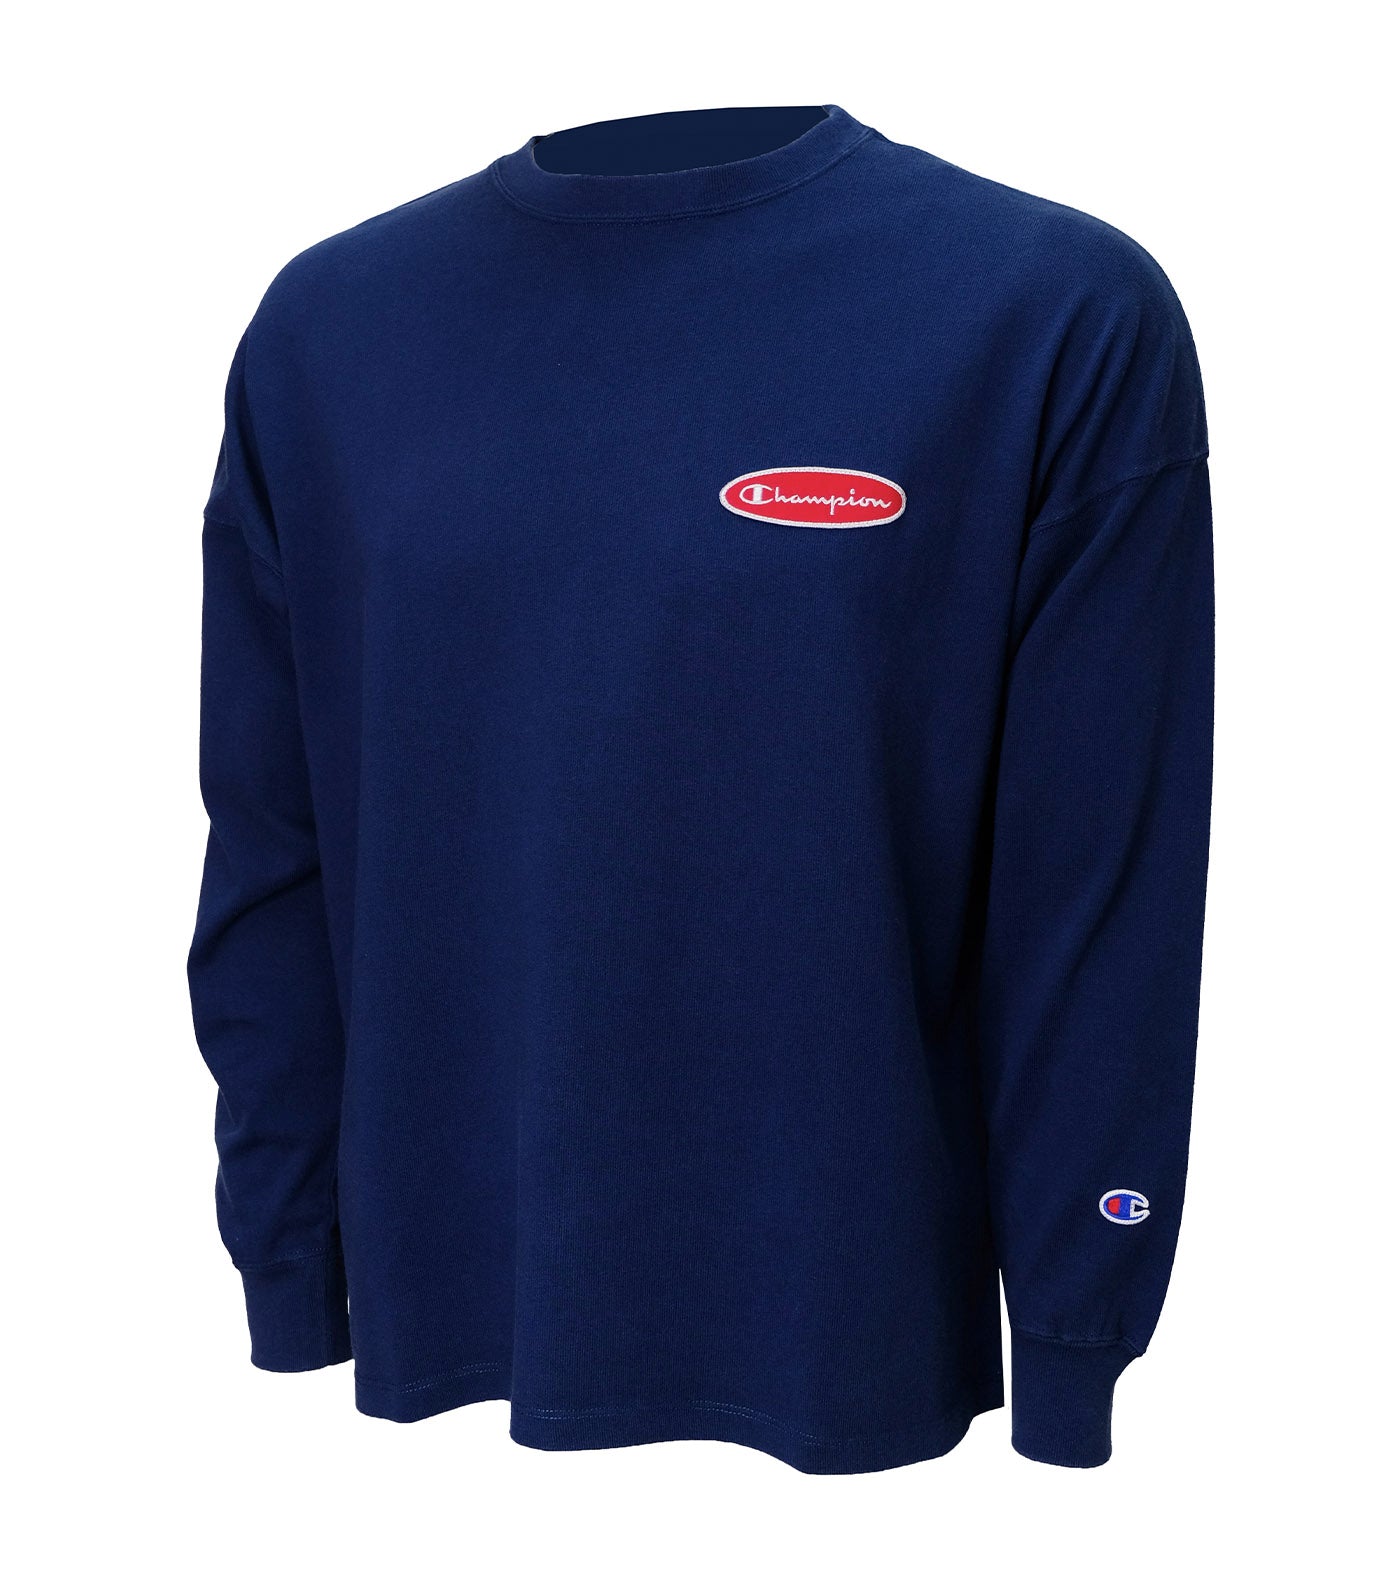 Japan Line Long-Sleeved T-Shirt Patch Navy